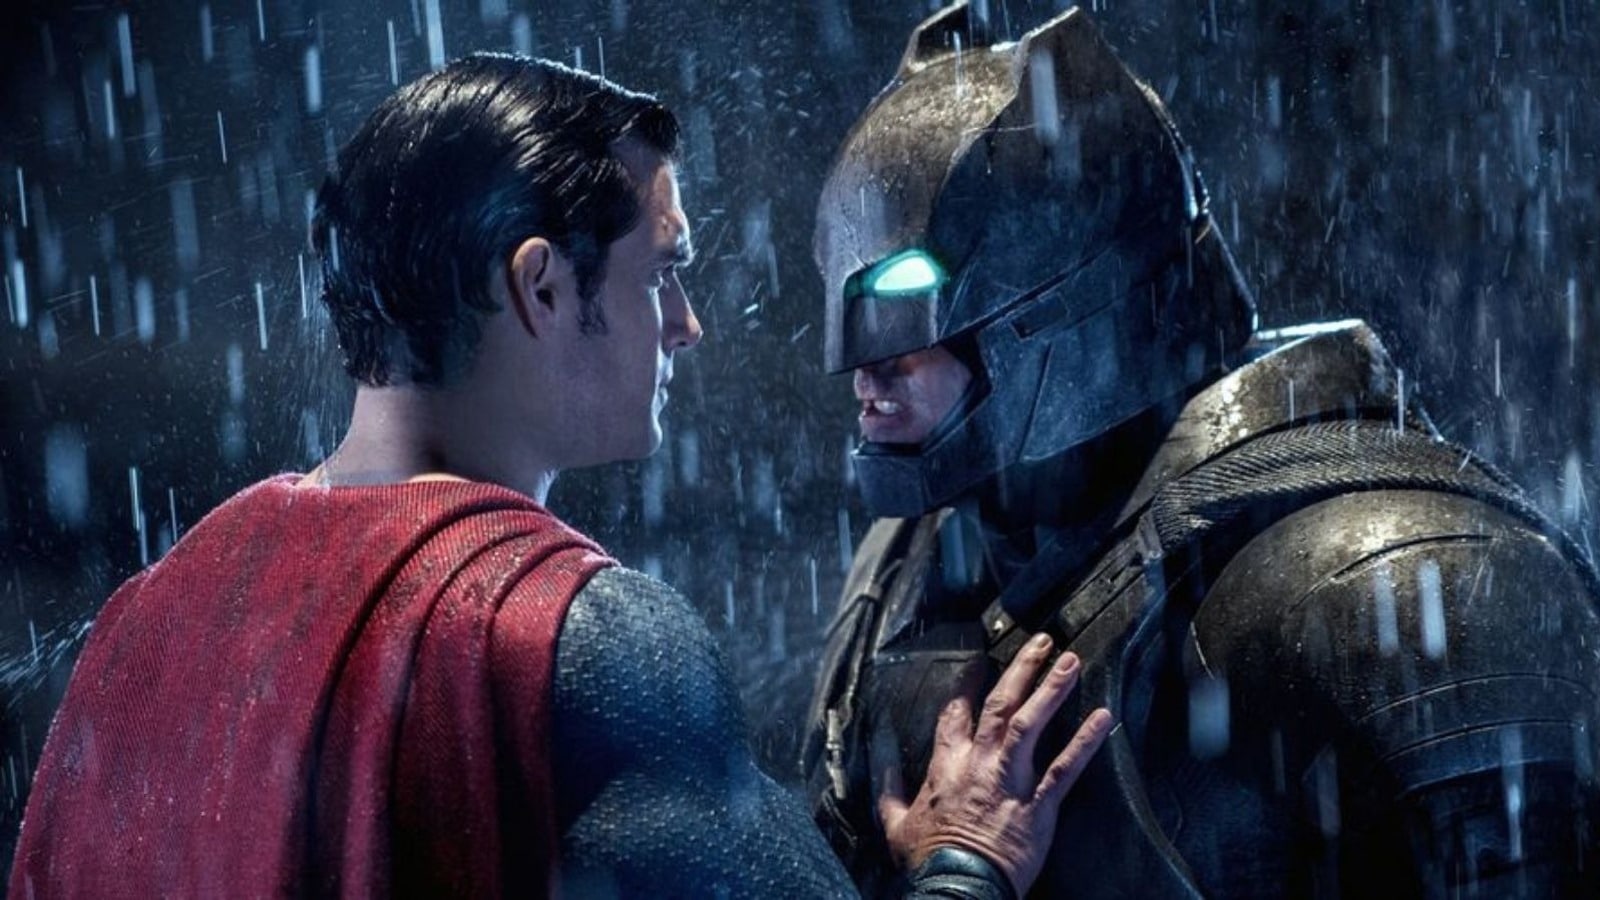 Despite heavyweight characters like Batman and Superman appearing together in films like Justice League and Dawn of Justice (in pic), DCEU could not topple Marvel.